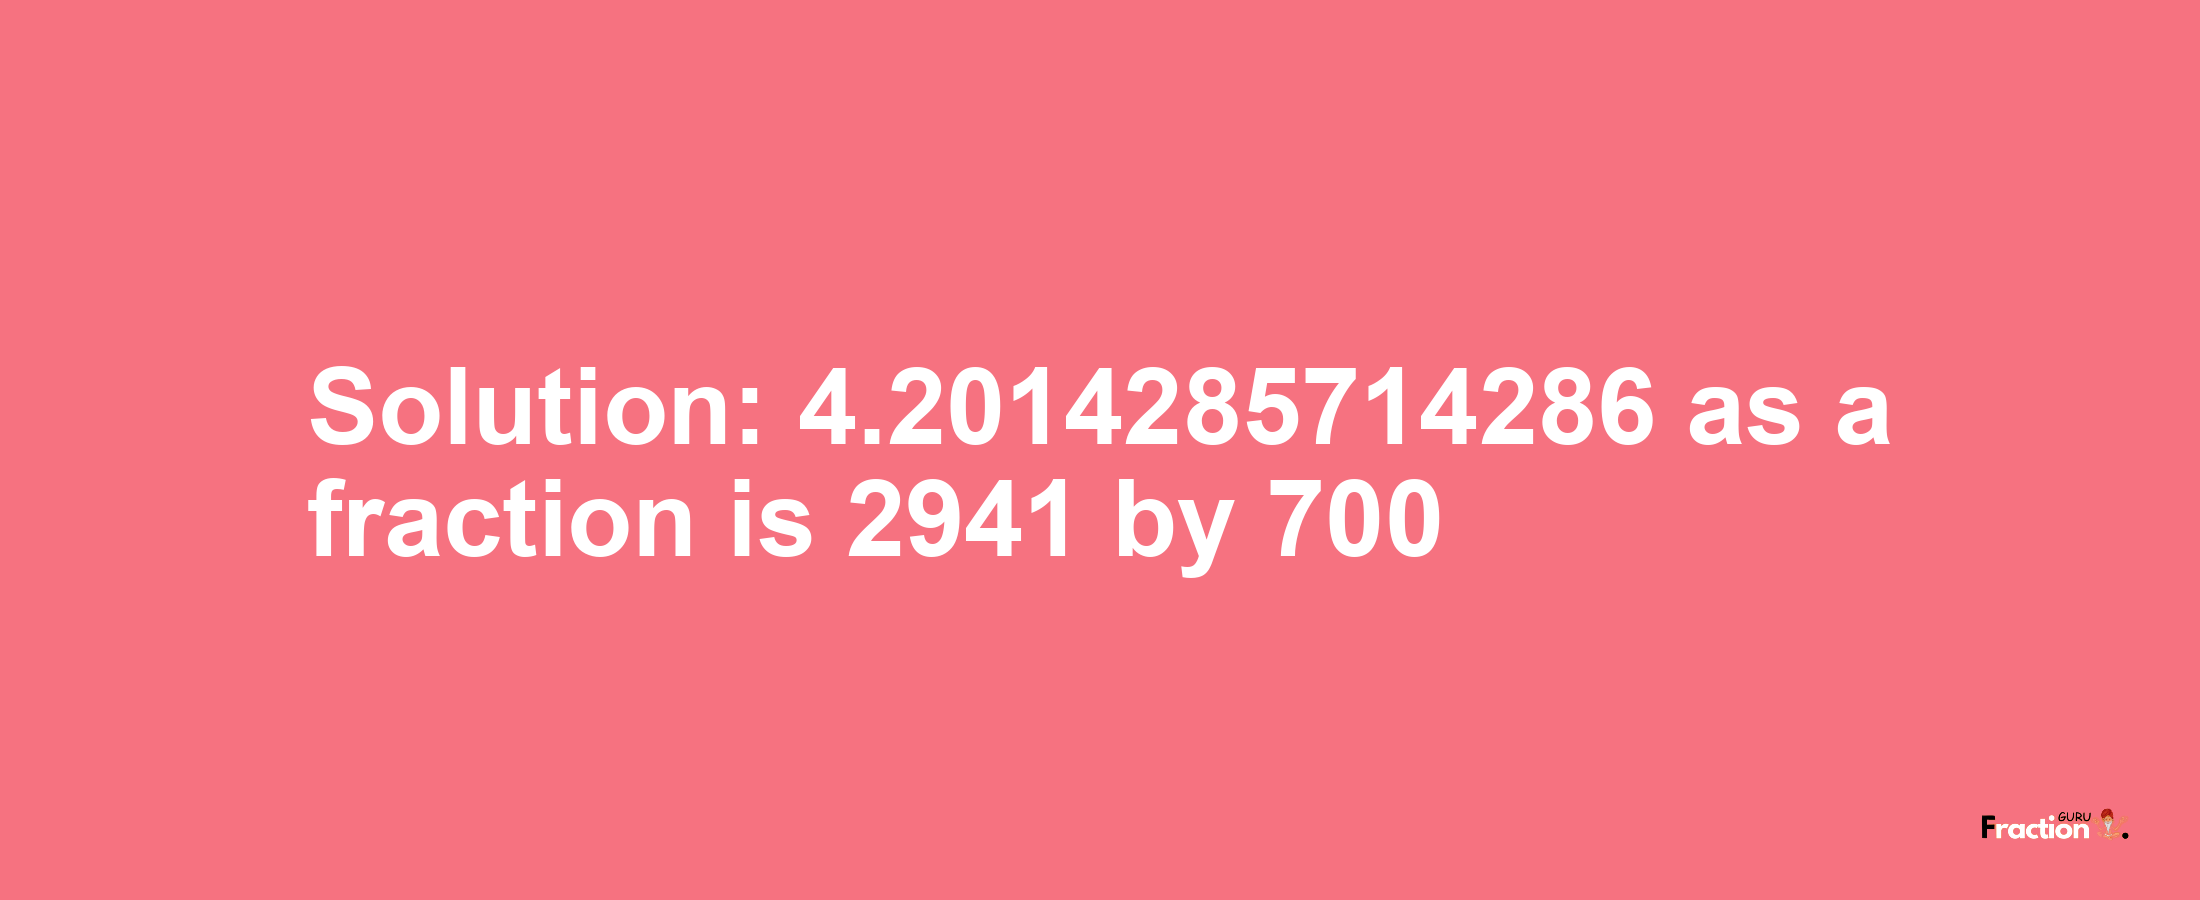 Solution:4.2014285714286 as a fraction is 2941/700